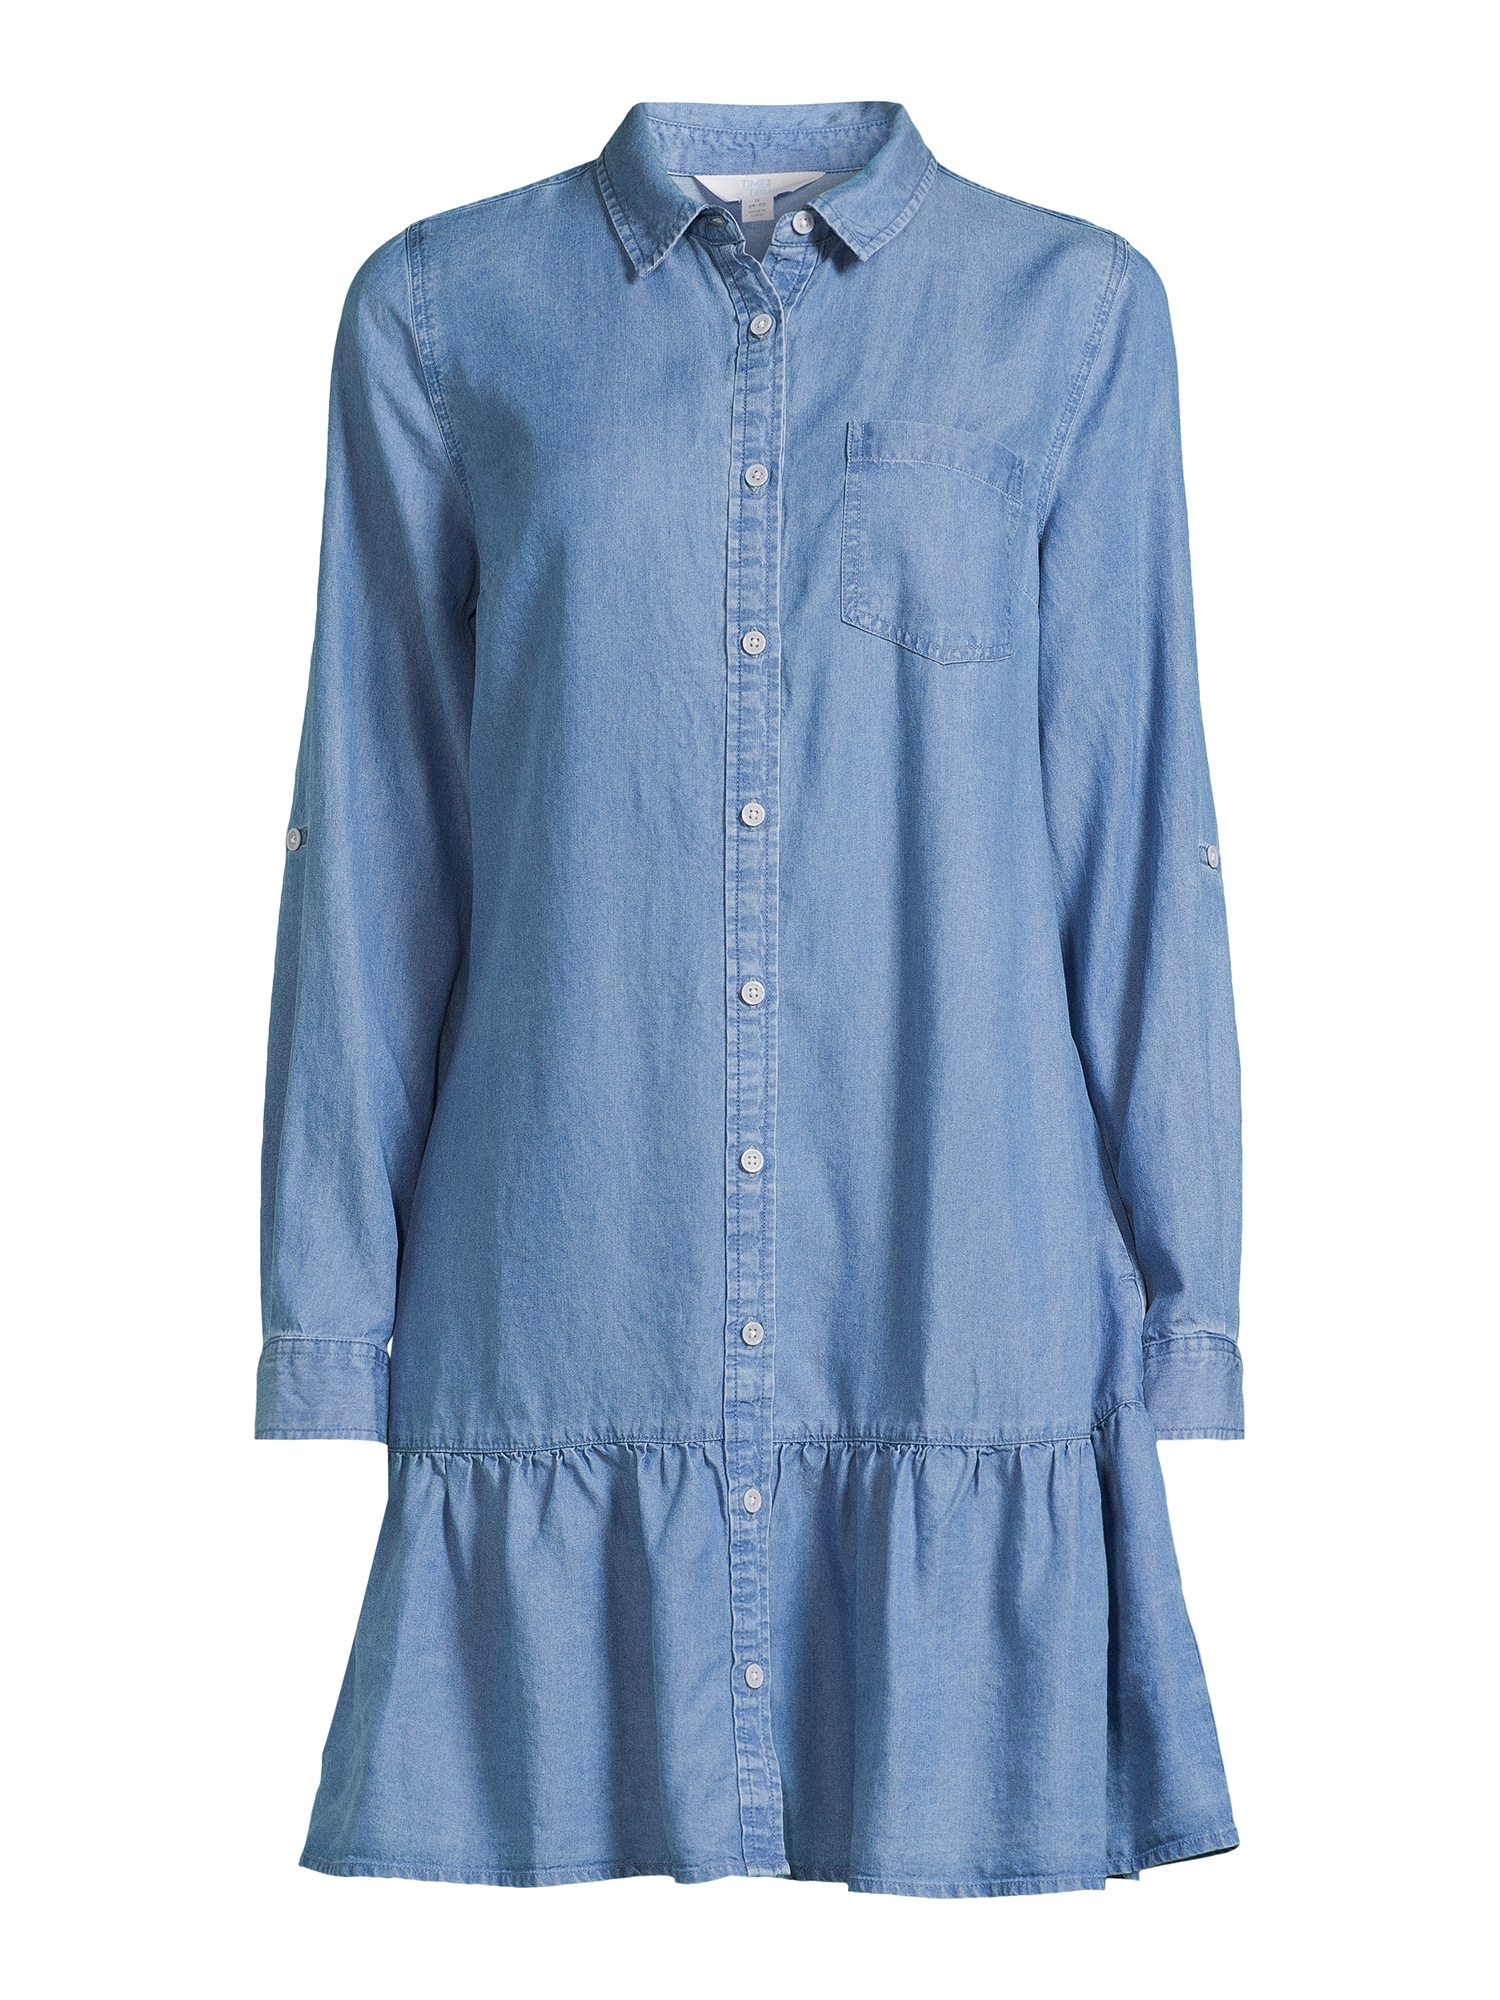 Time and Tru Women's Mini Shirt Dress with Long Sleeves, Sizes XS-3XL - image 3 of 5